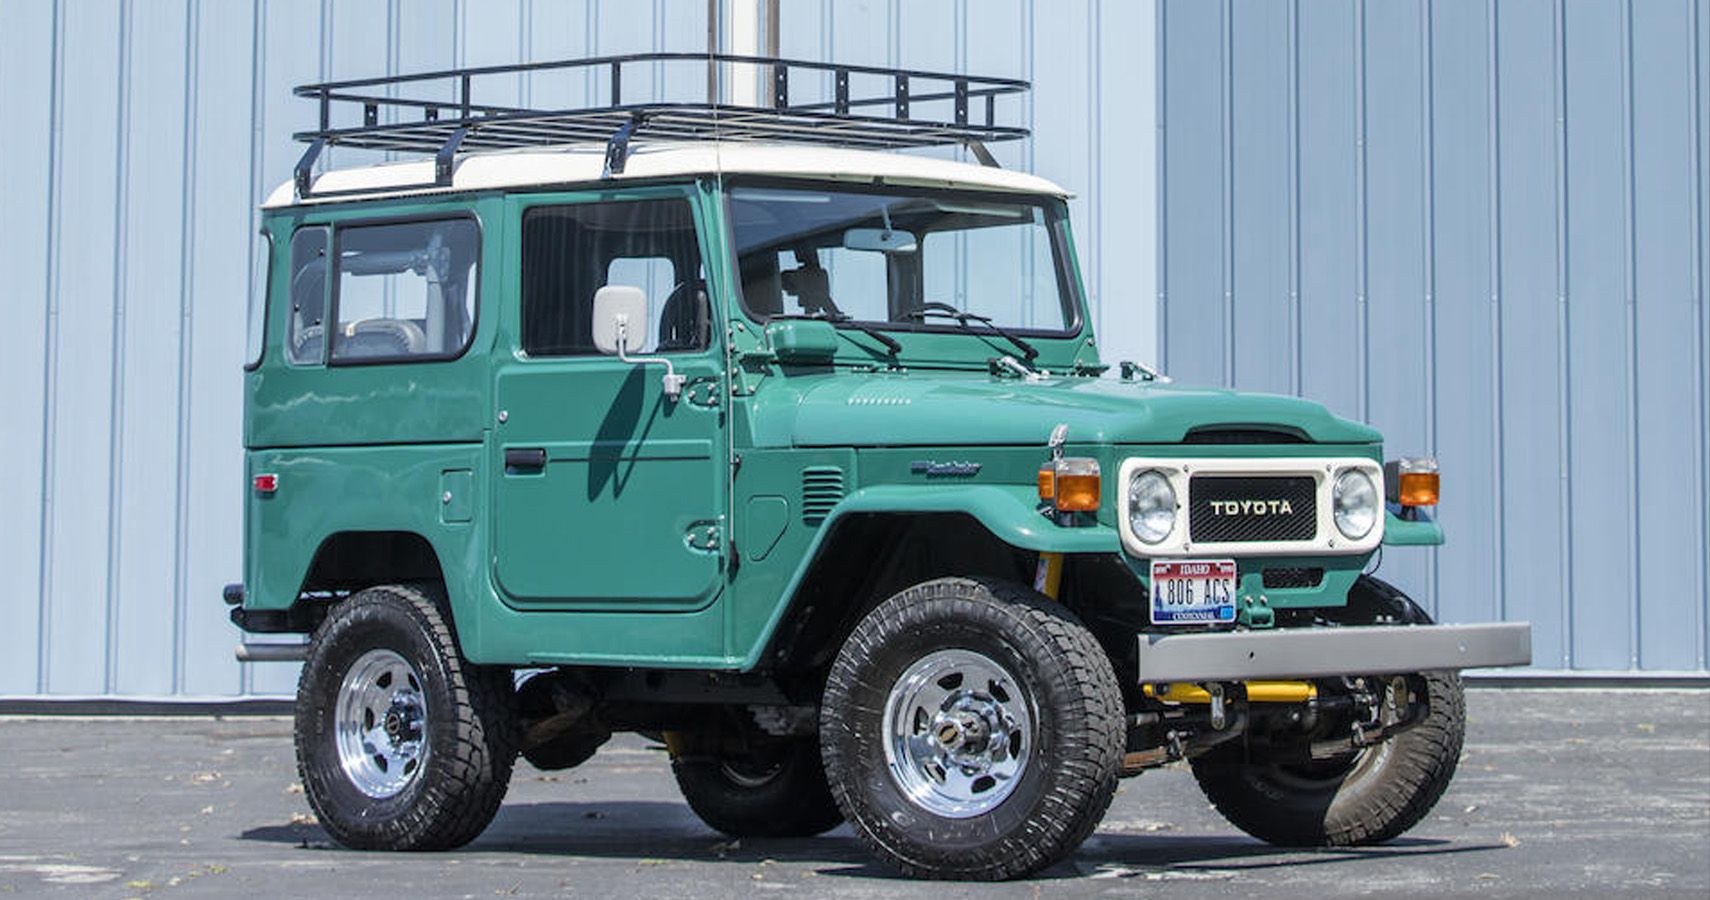 Toyota 1980 FJ40 Land Cruiser once owned by Tom Hanks in parking lot